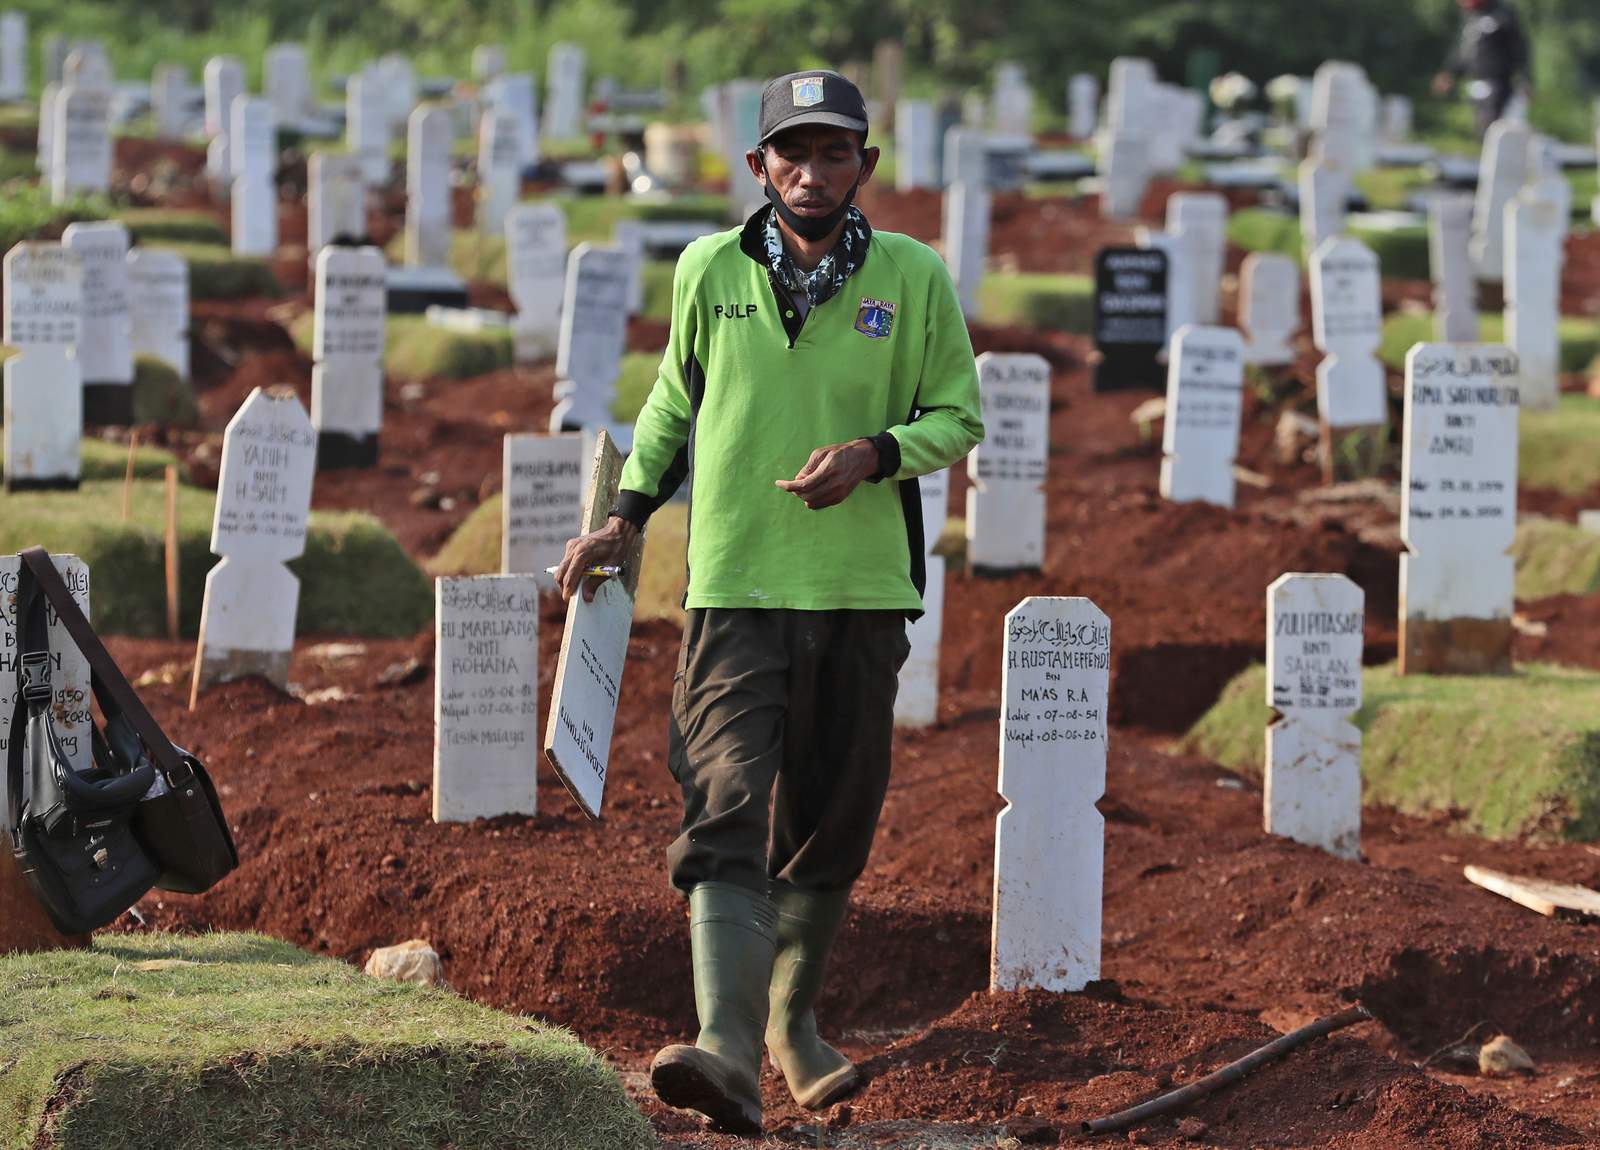 Burial traditions clash with coronavirus safety in Indonesia